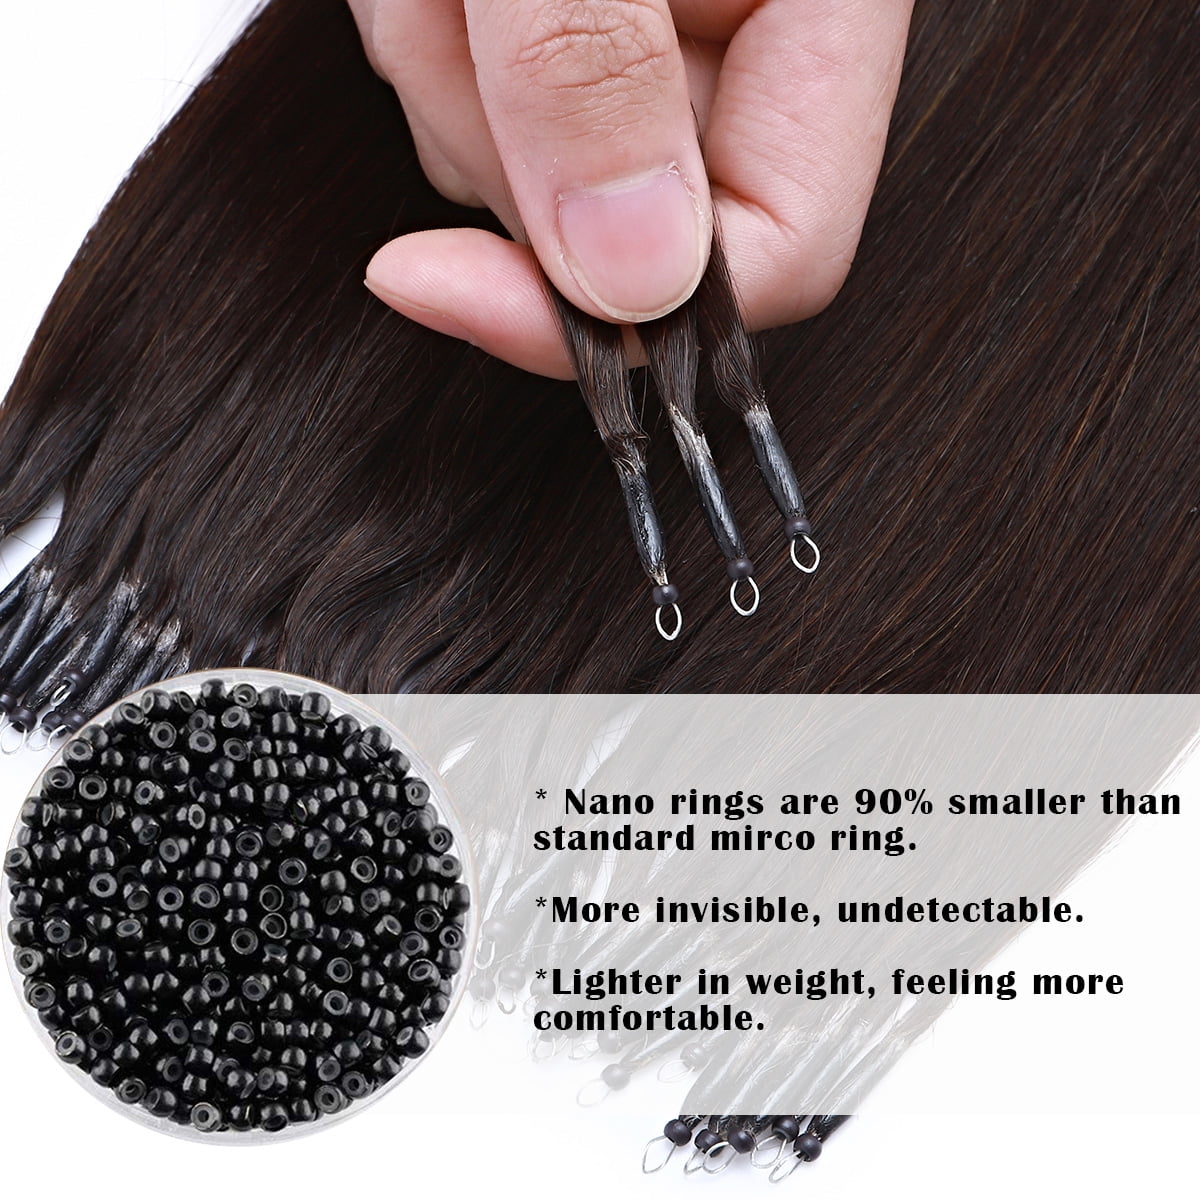 Sego Nano Bead Ring Human Hair Extension Pre Bonded Nano Tip Remy Hair Extensions Micro Beads Rings Loop Hand Tied Hairpiece 16 inch #04 Medium